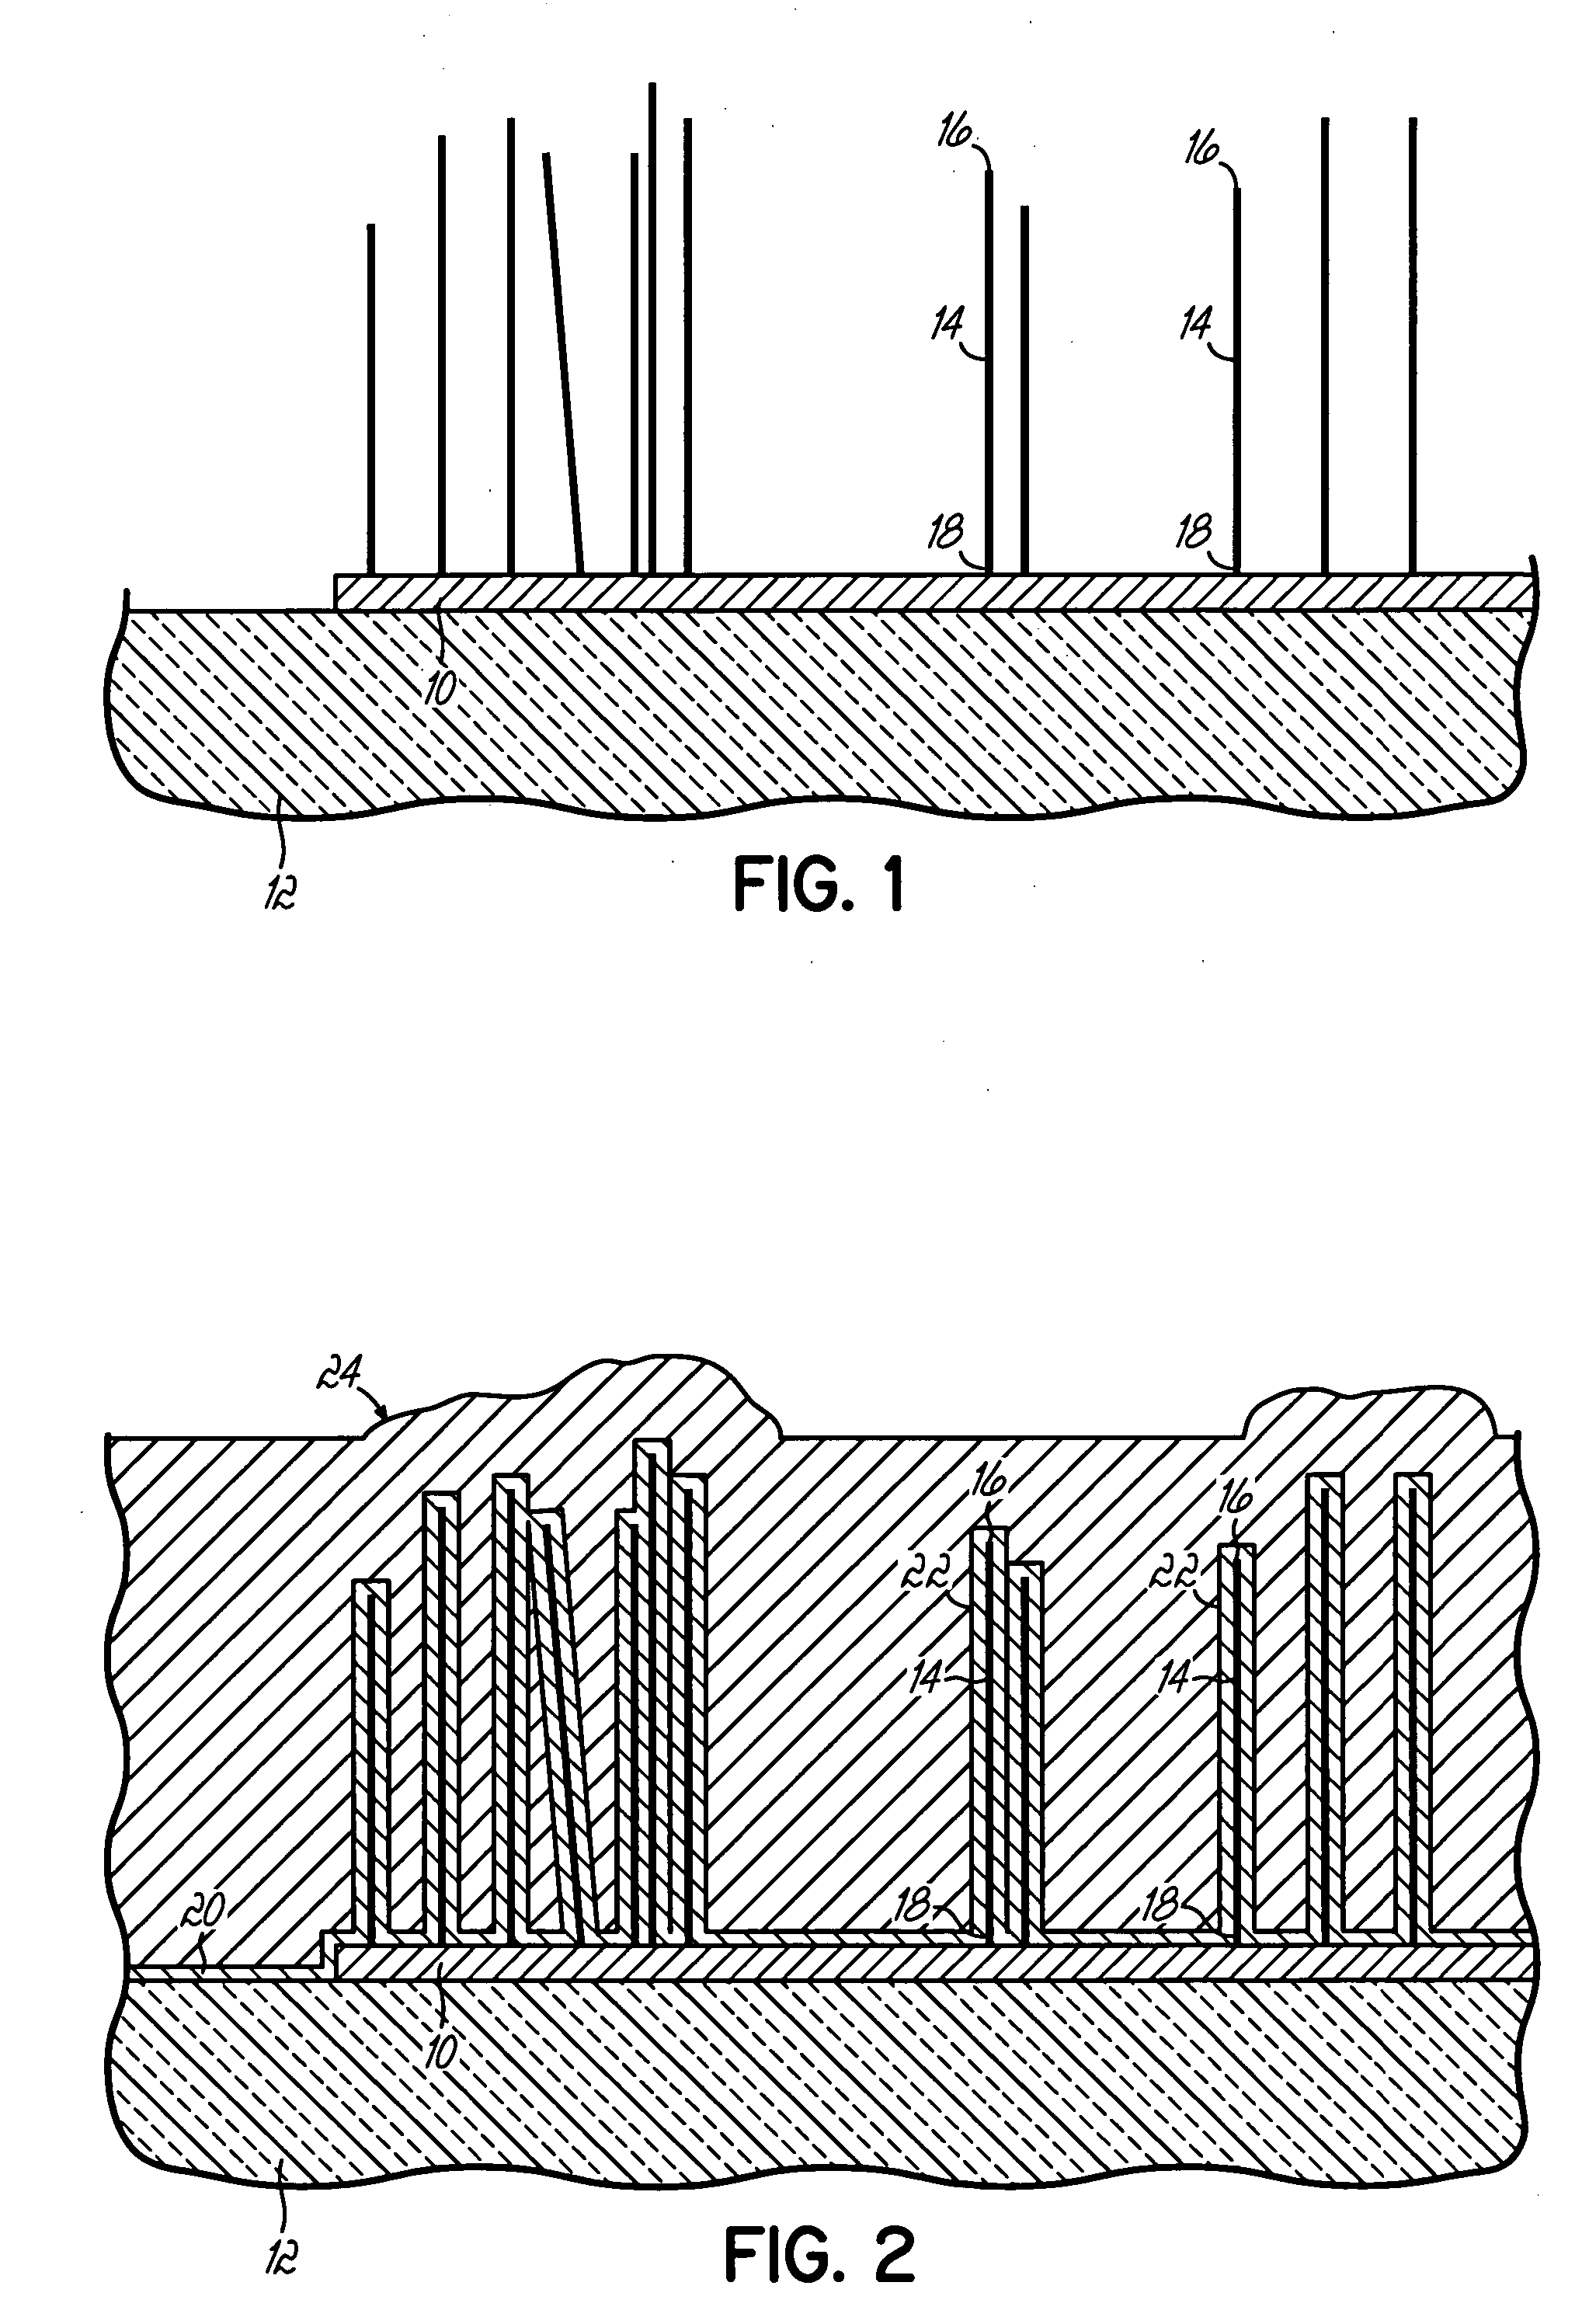 Vertical nanotube semiconductor device structures and methods of forming the same